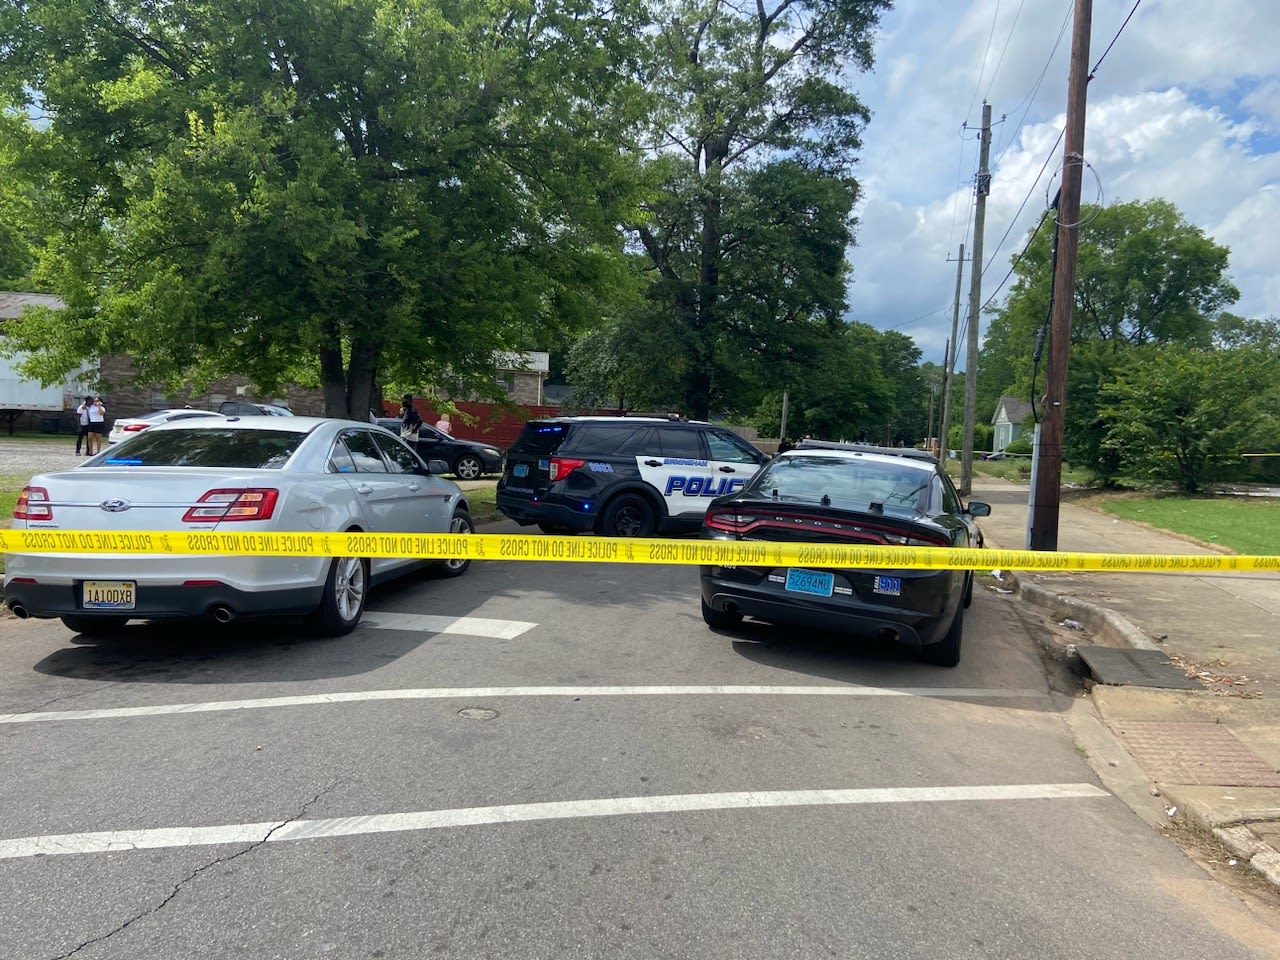 Man shot to death in wheelchair in east Birmingham; 4 suspects sought